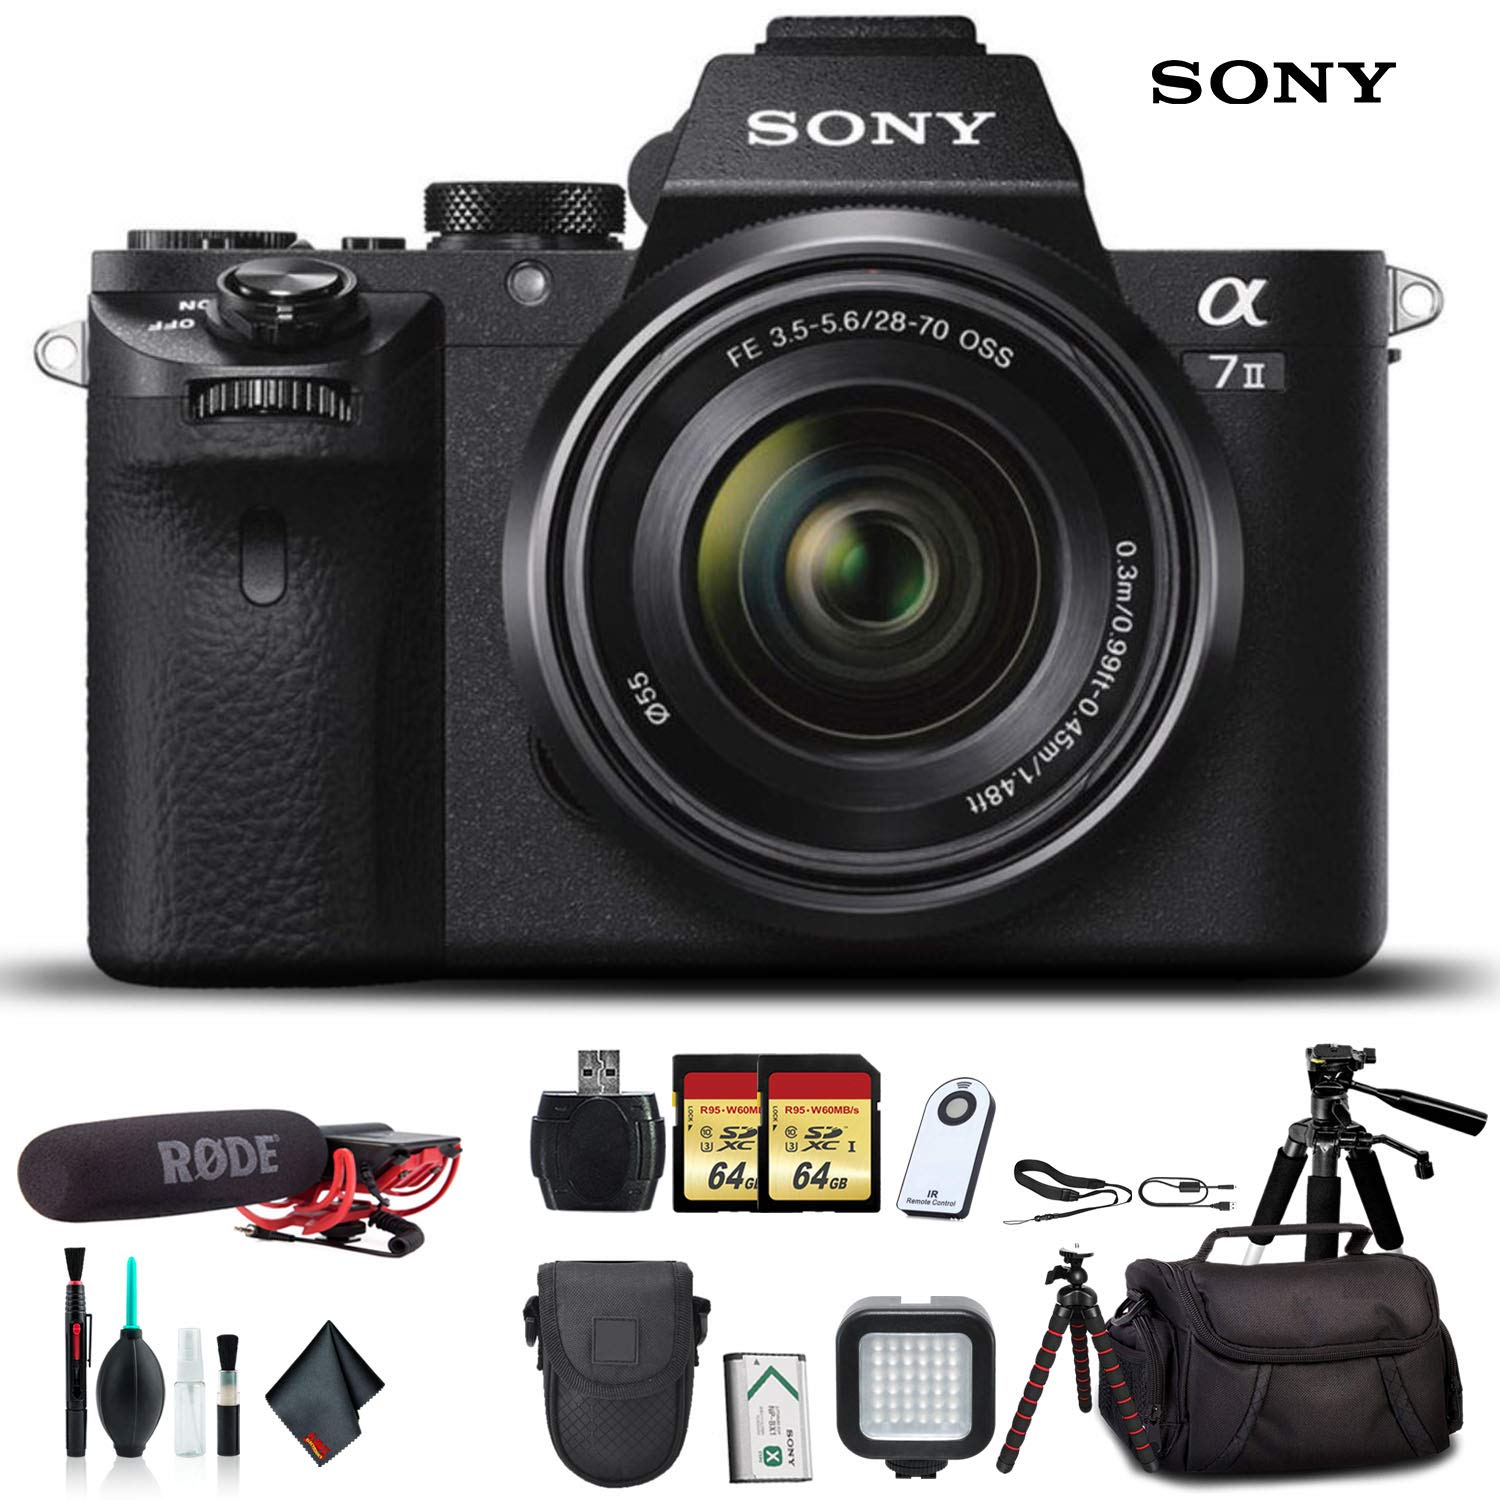 Sony Alpha a7 II Mirrorless Camera with FE 28-70mm f/3.5-5.6 OSS Lens With Soft Bag, 2x Extra Batteries, Rode Mic, LED Light, HD Monitor, 2x 64GB Memory Card, Sling Bag, , Plus Essential Accessories